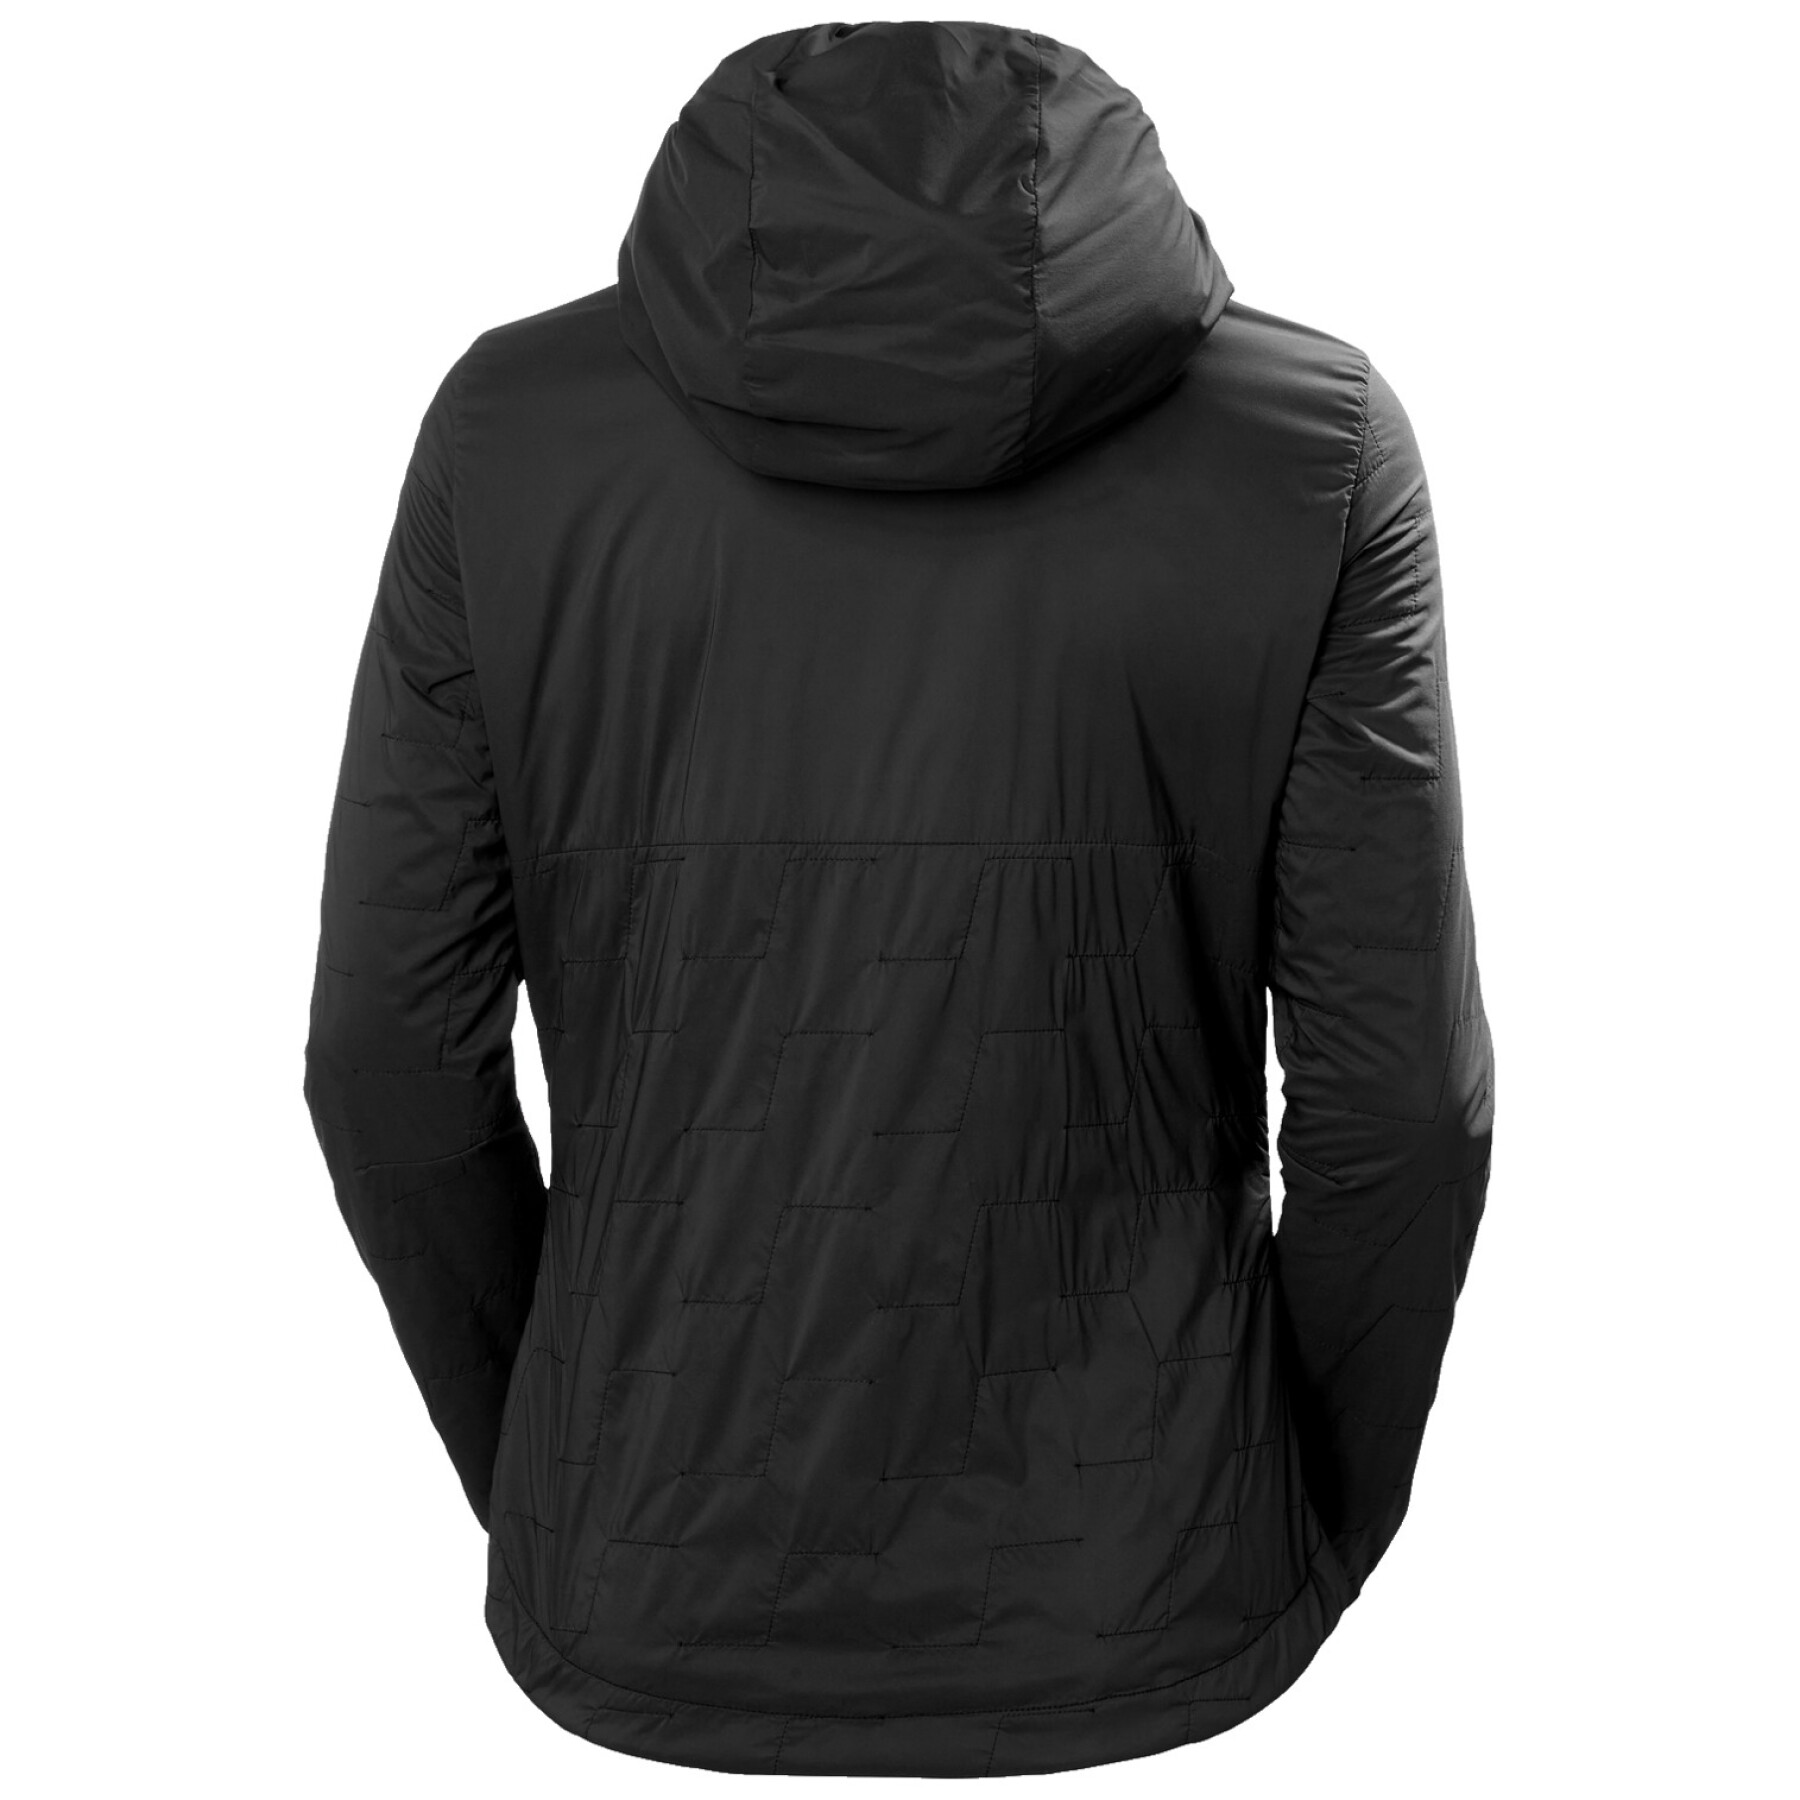 Insulated ski jacket with hood for women Helly Hansen Lifaloft air